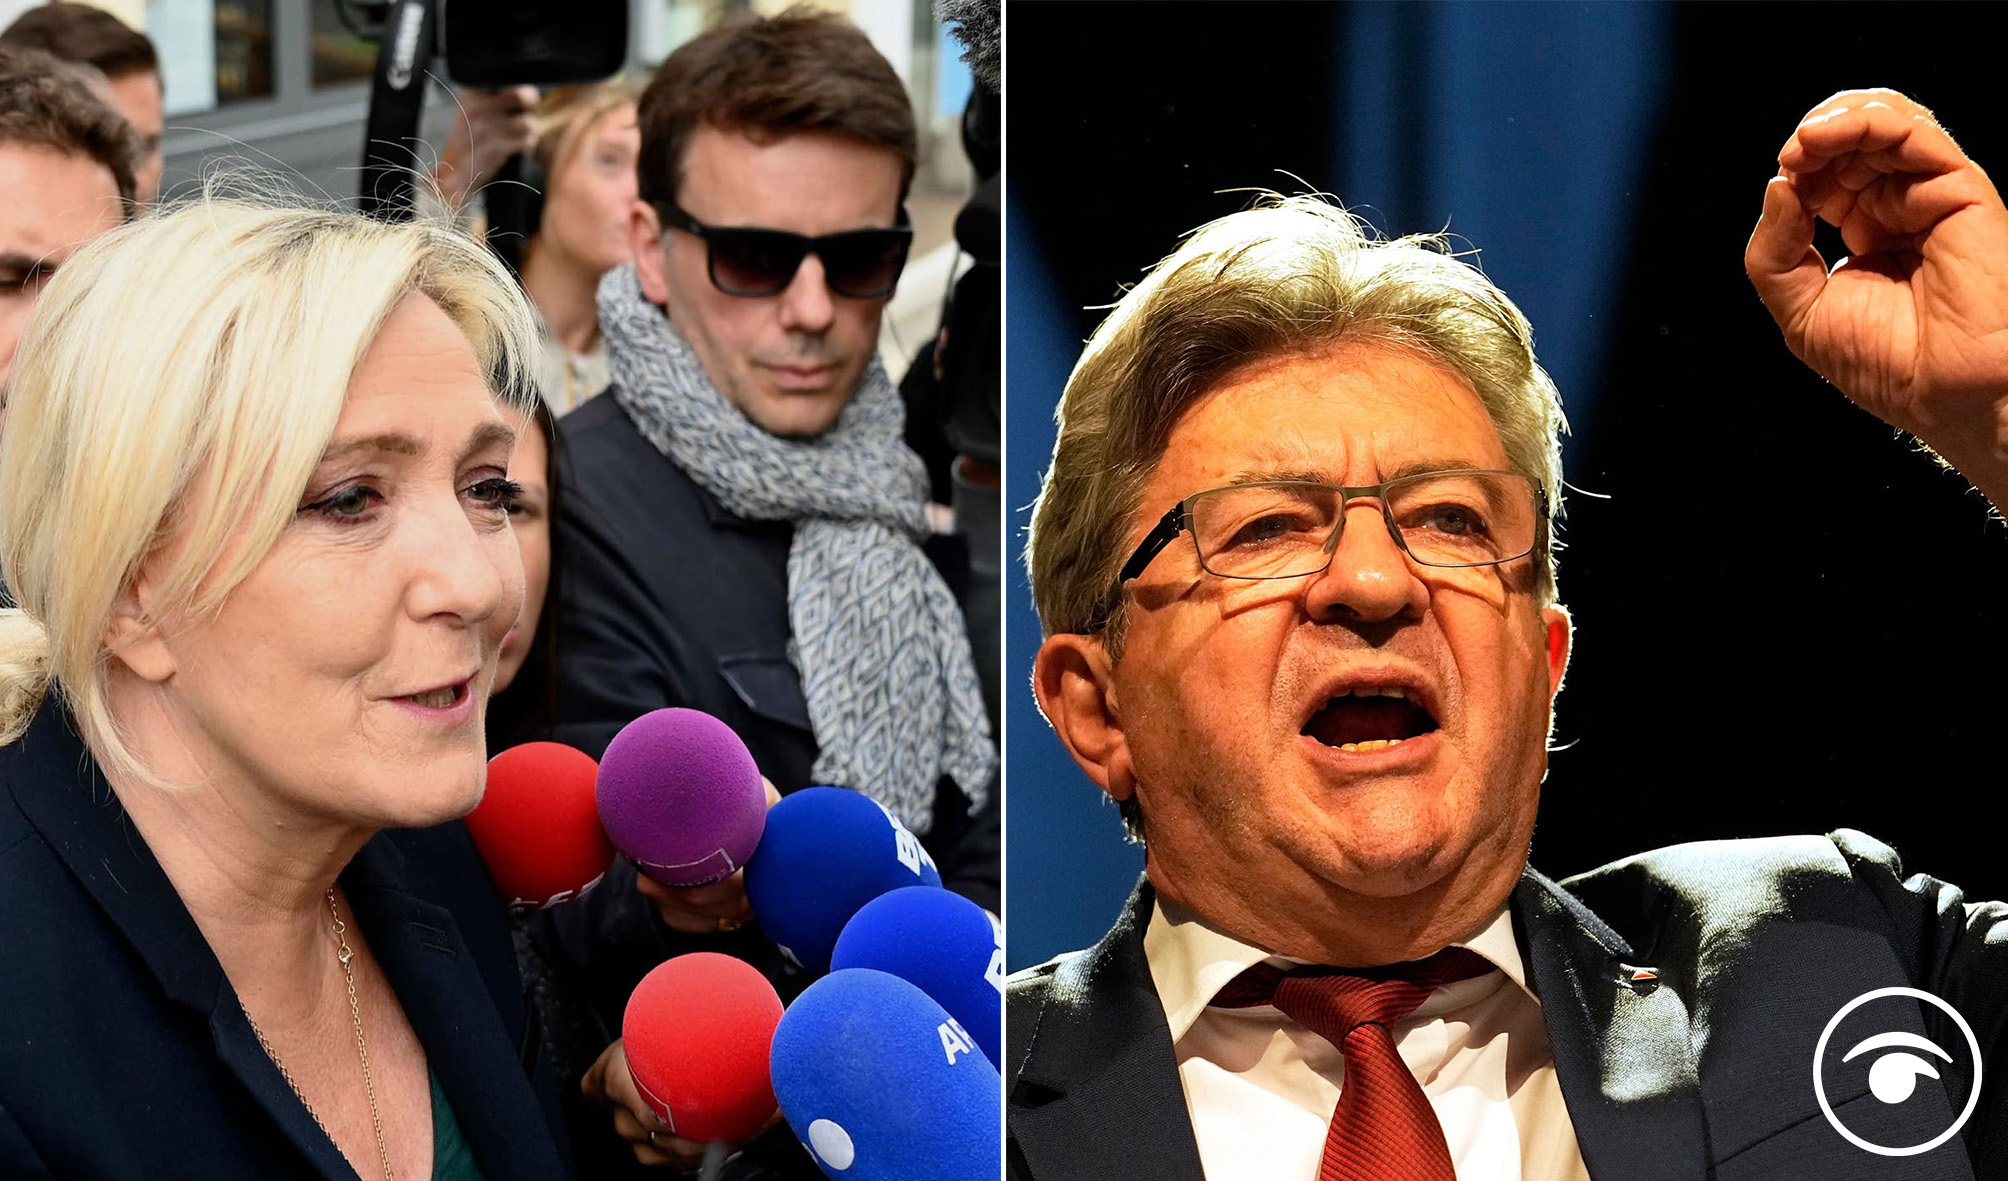 Yes Le Pen made gains but the left is the powerbroker not the far-right